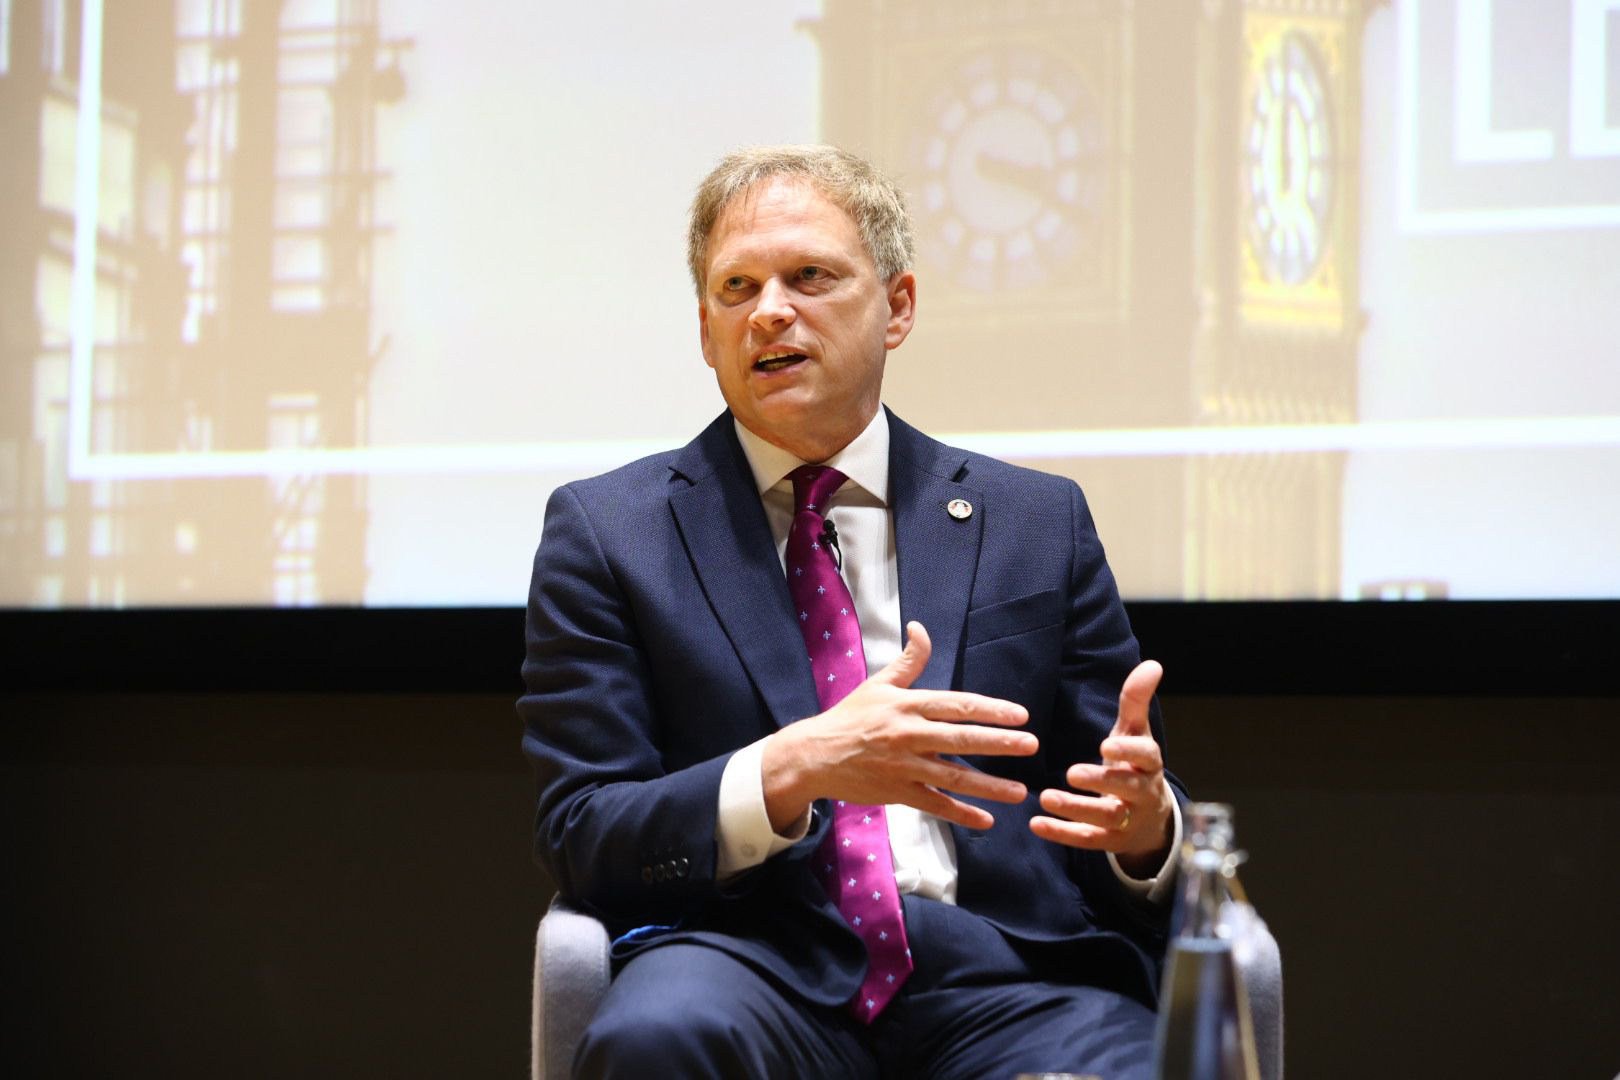 British defence secretary Grant Shapps speaking Wednesday at the London Defence Conference at King’s College London. Photo: King’s College/dpa